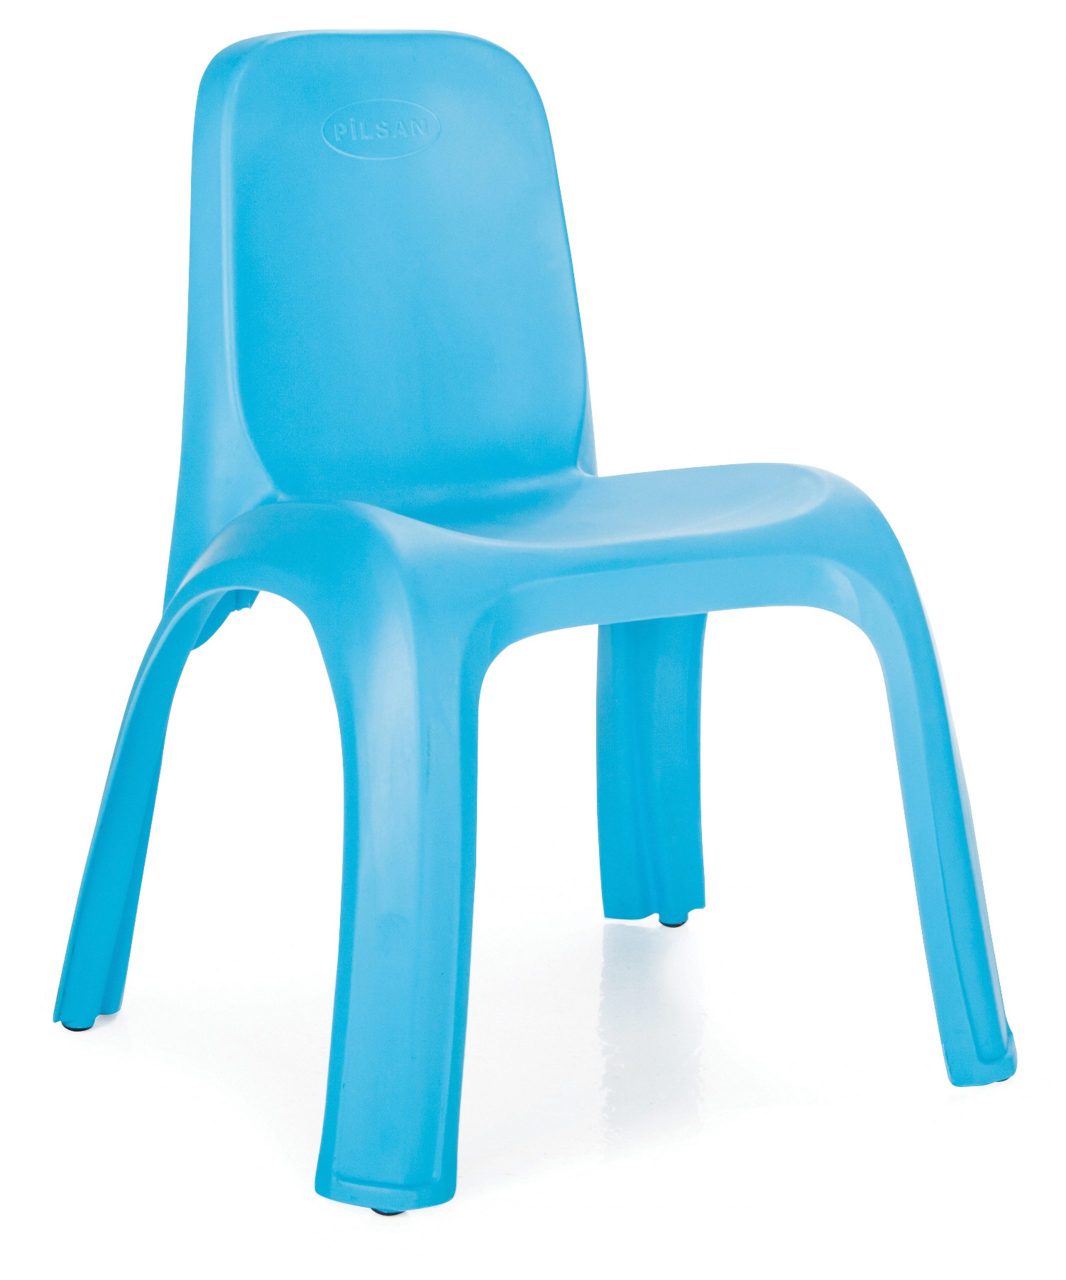 03-417-King-Chair-Blue-scaled